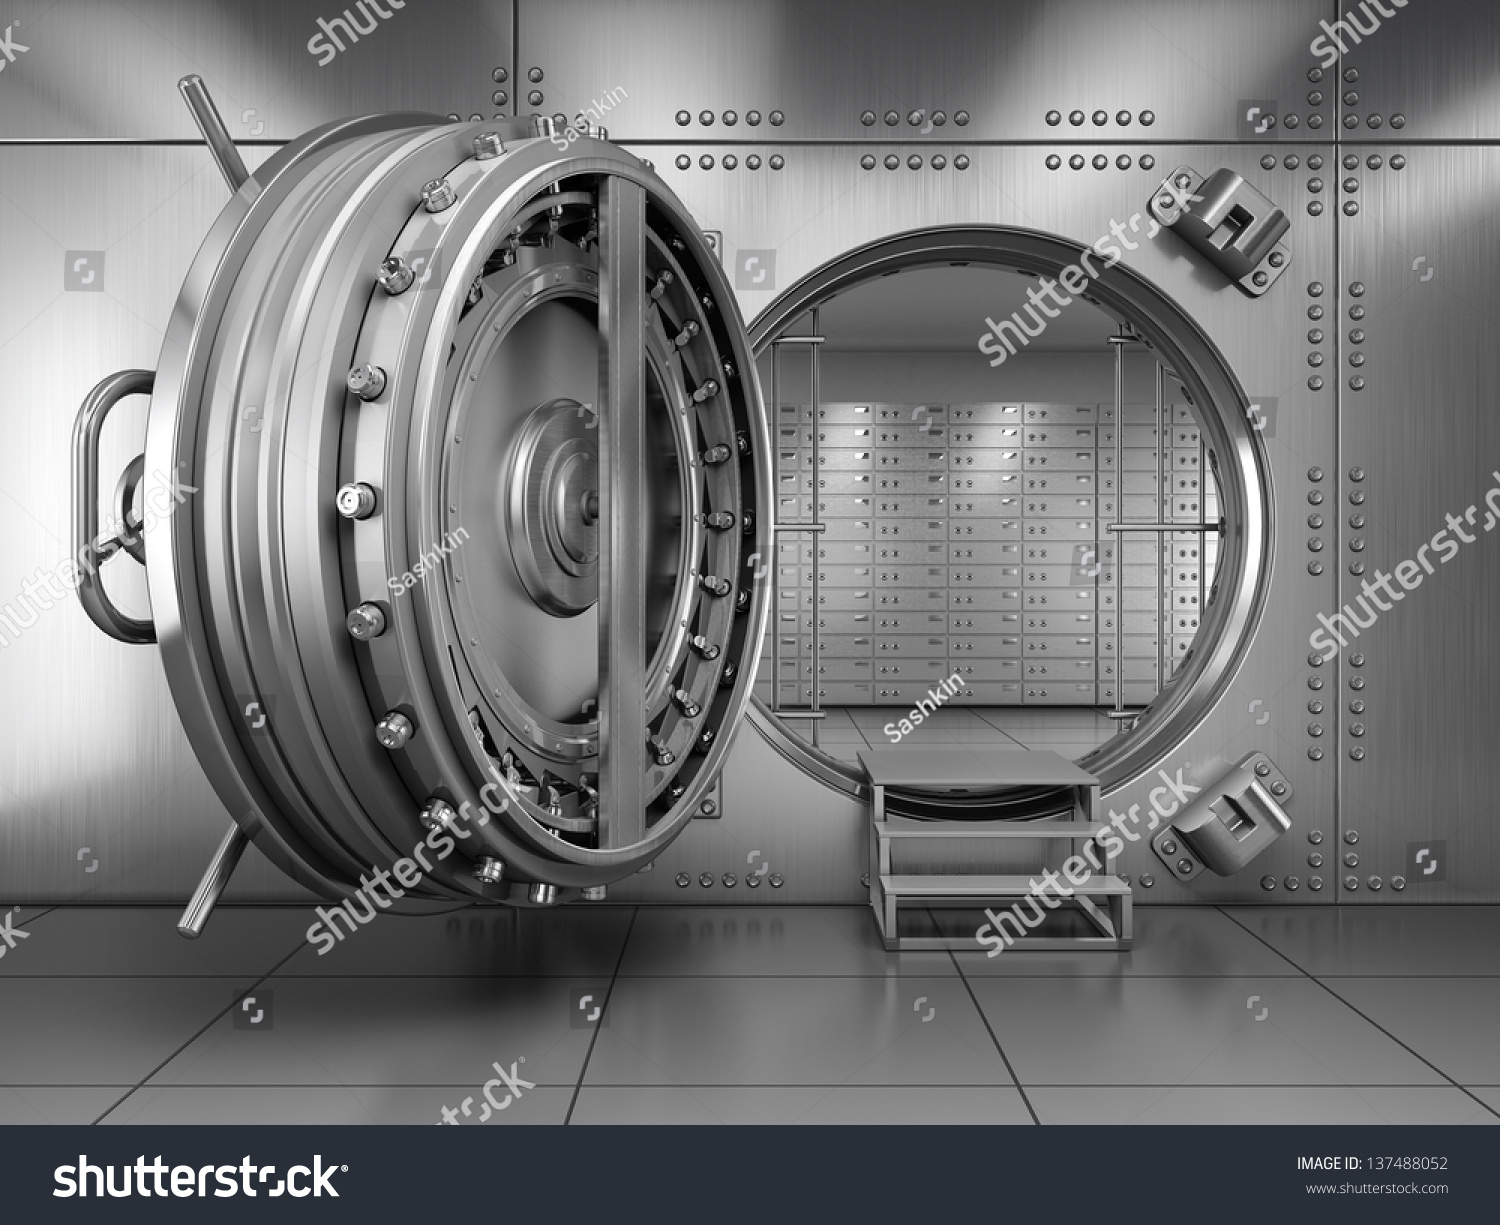 bank security clipart - photo #18